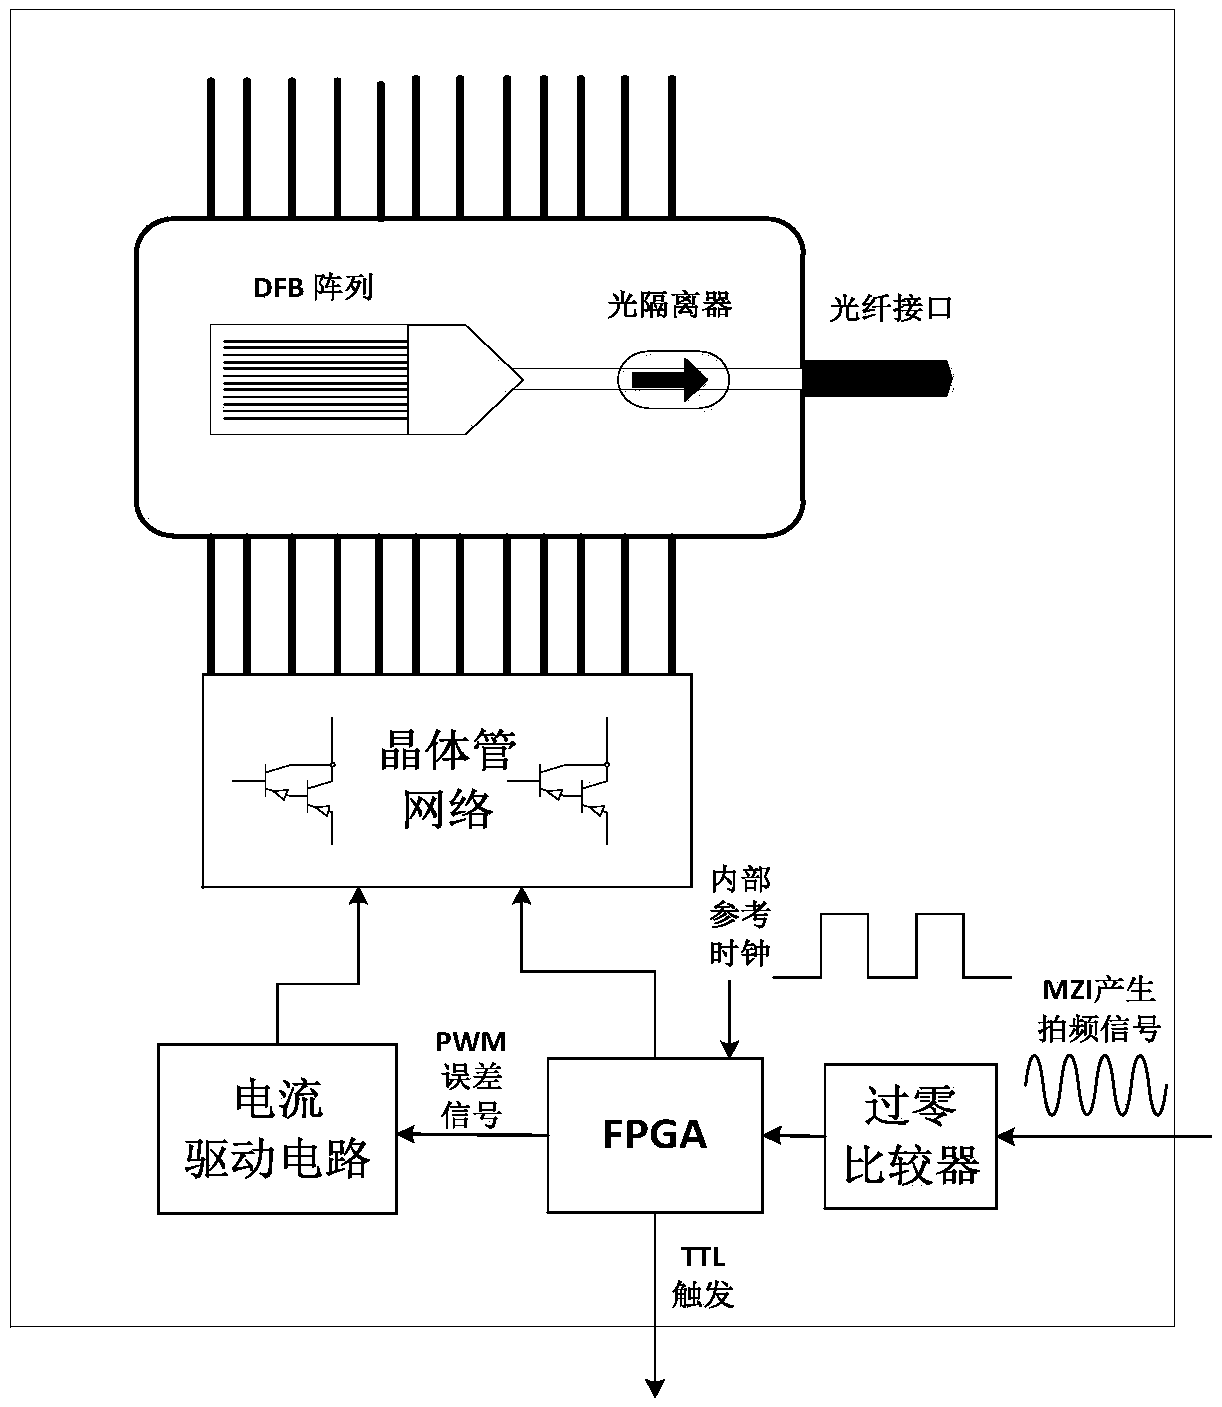 Optical fiber frequency domain interferometry ranging system and method based on DFB array swept light source